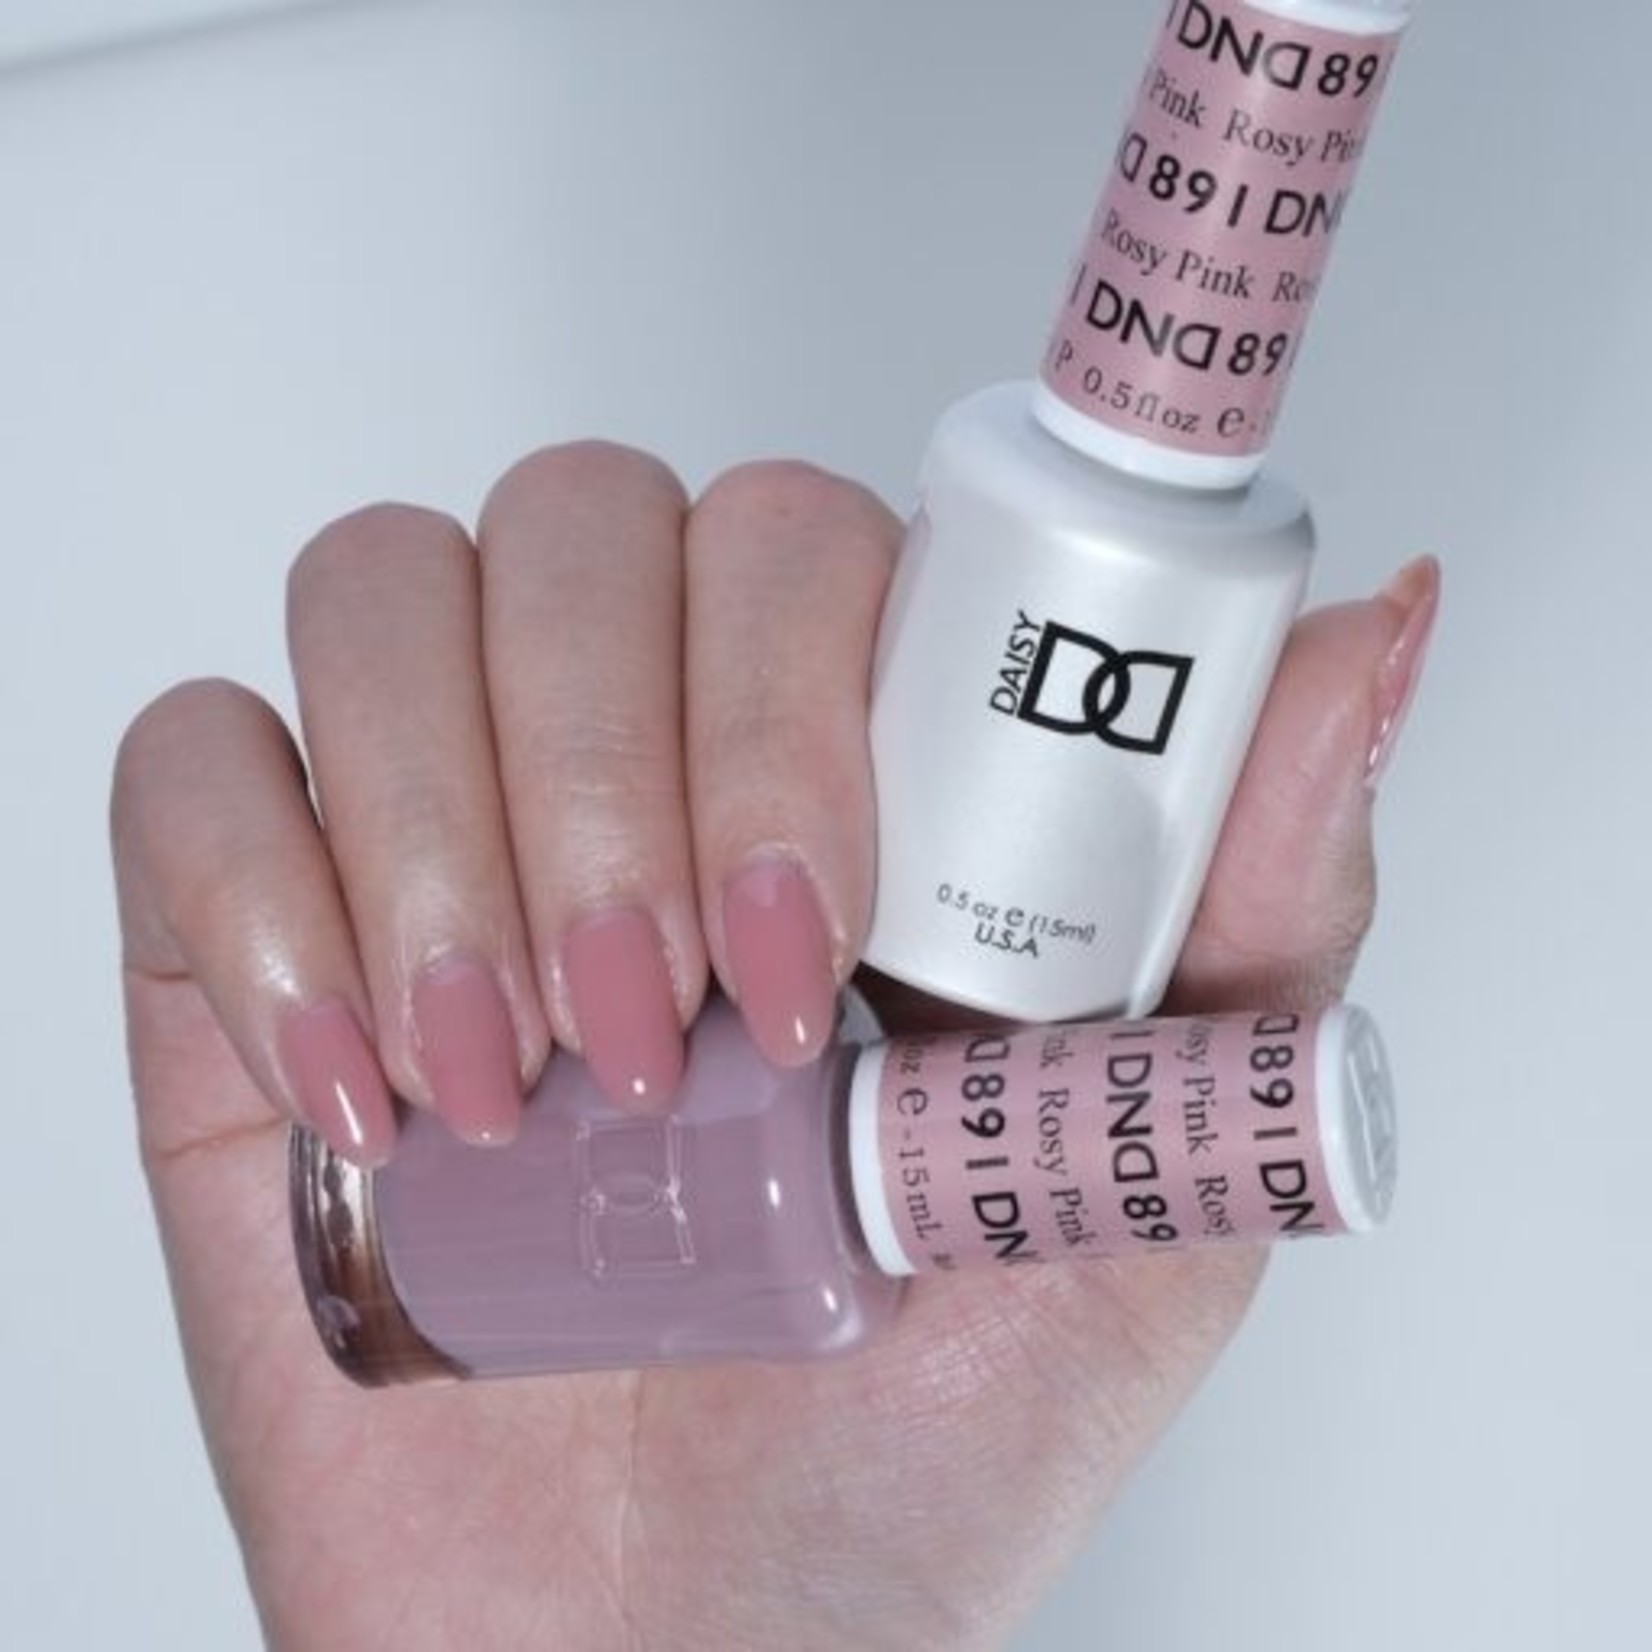 DND DND - 0 891 - Rosy Pink - DUO Polish